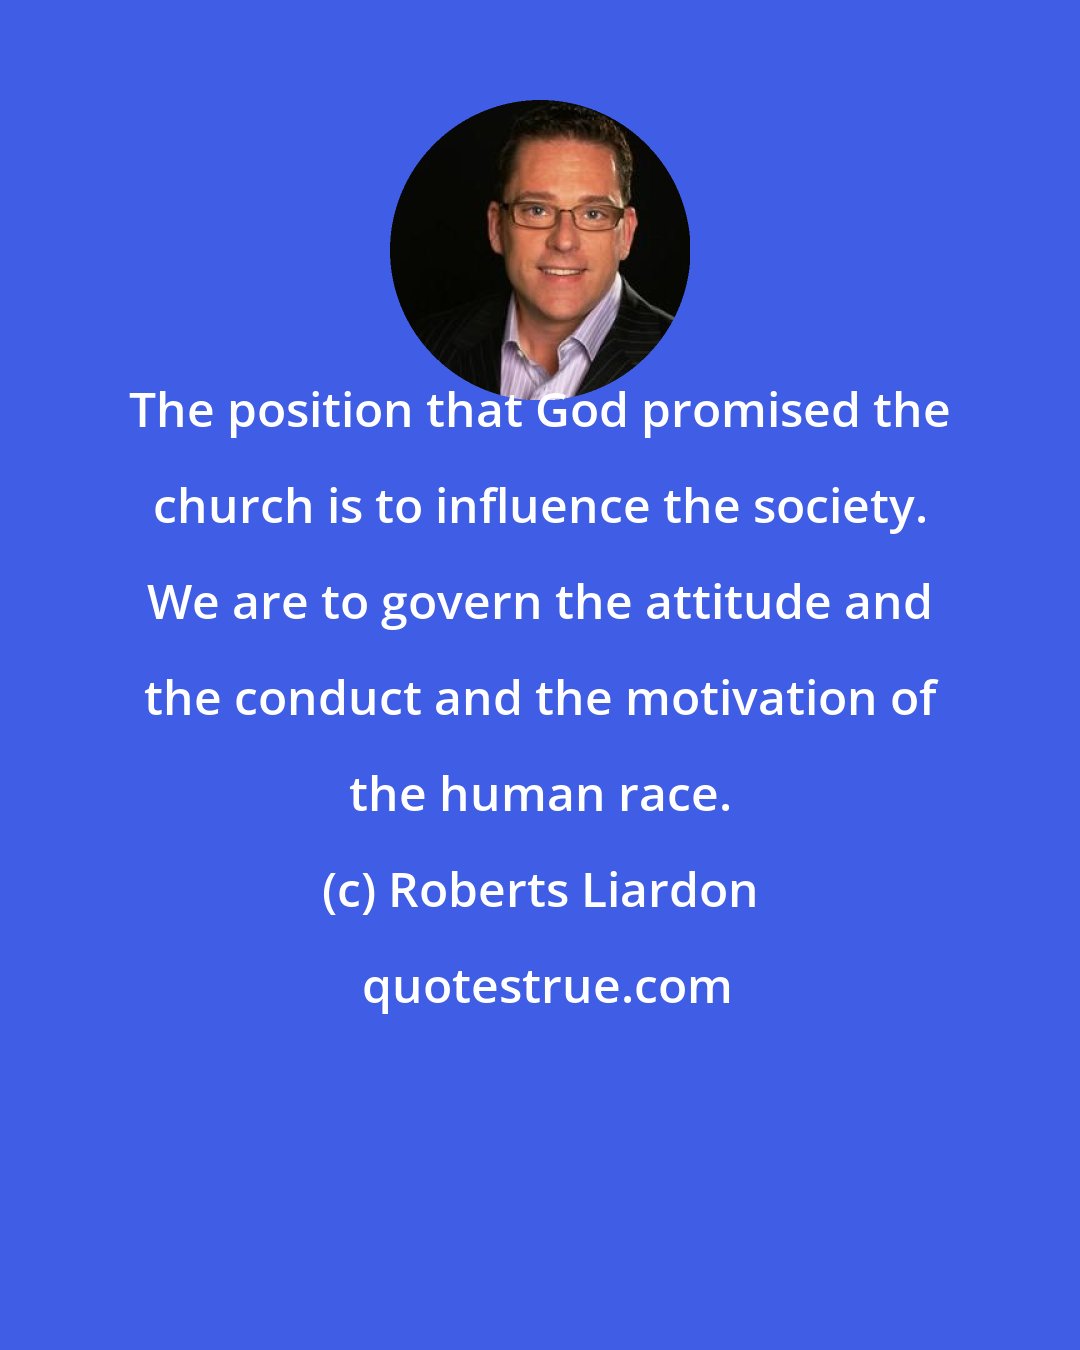 Roberts Liardon: The position that God promised the church is to influence the society. We are to govern the attitude and the conduct and the motivation of the human race.